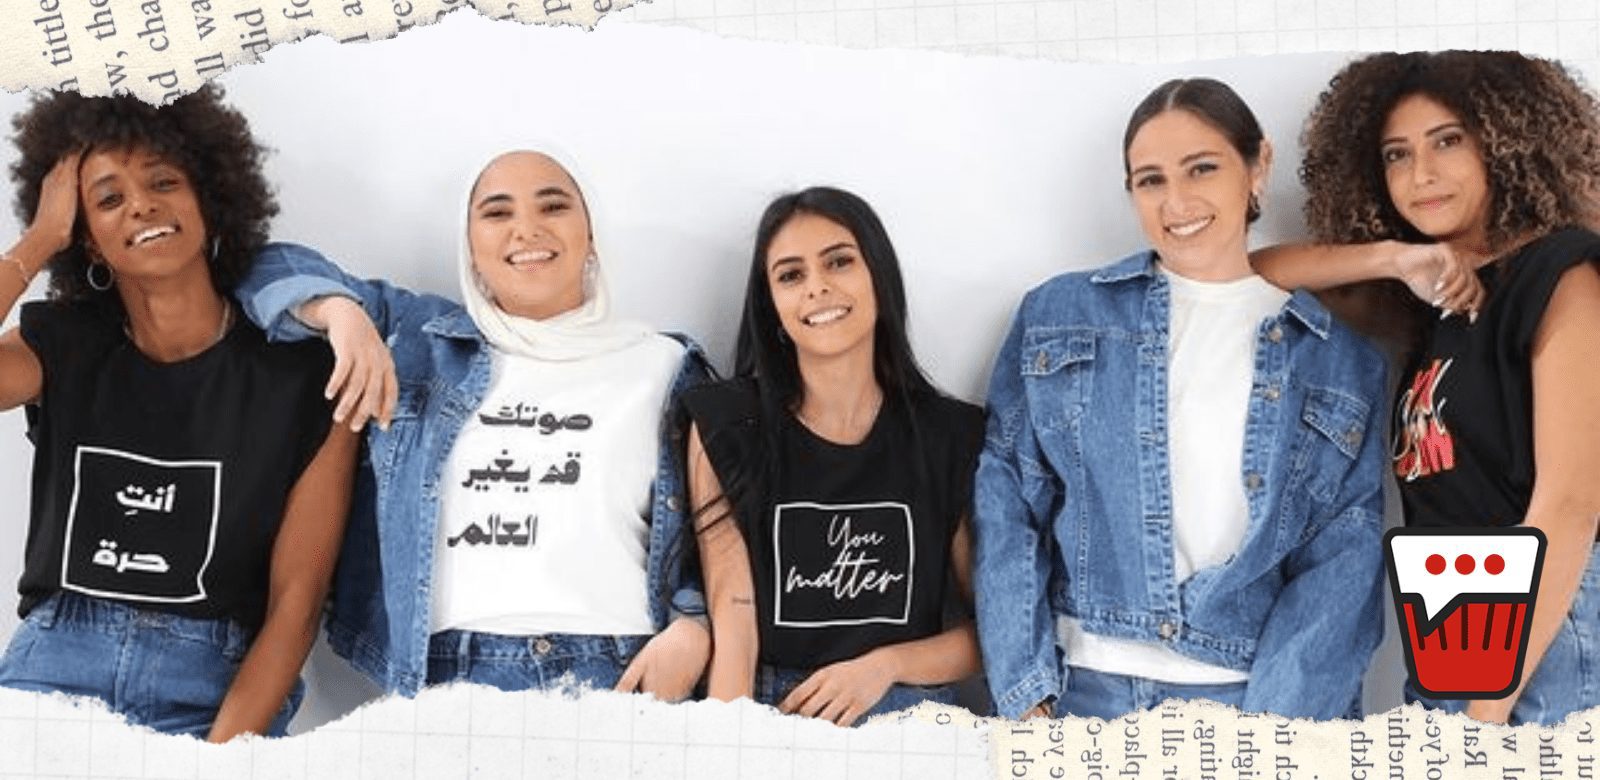 Against all odds: How five Middle Eastern 'womentrepreneurs' are using the power of social media to start their own businesses